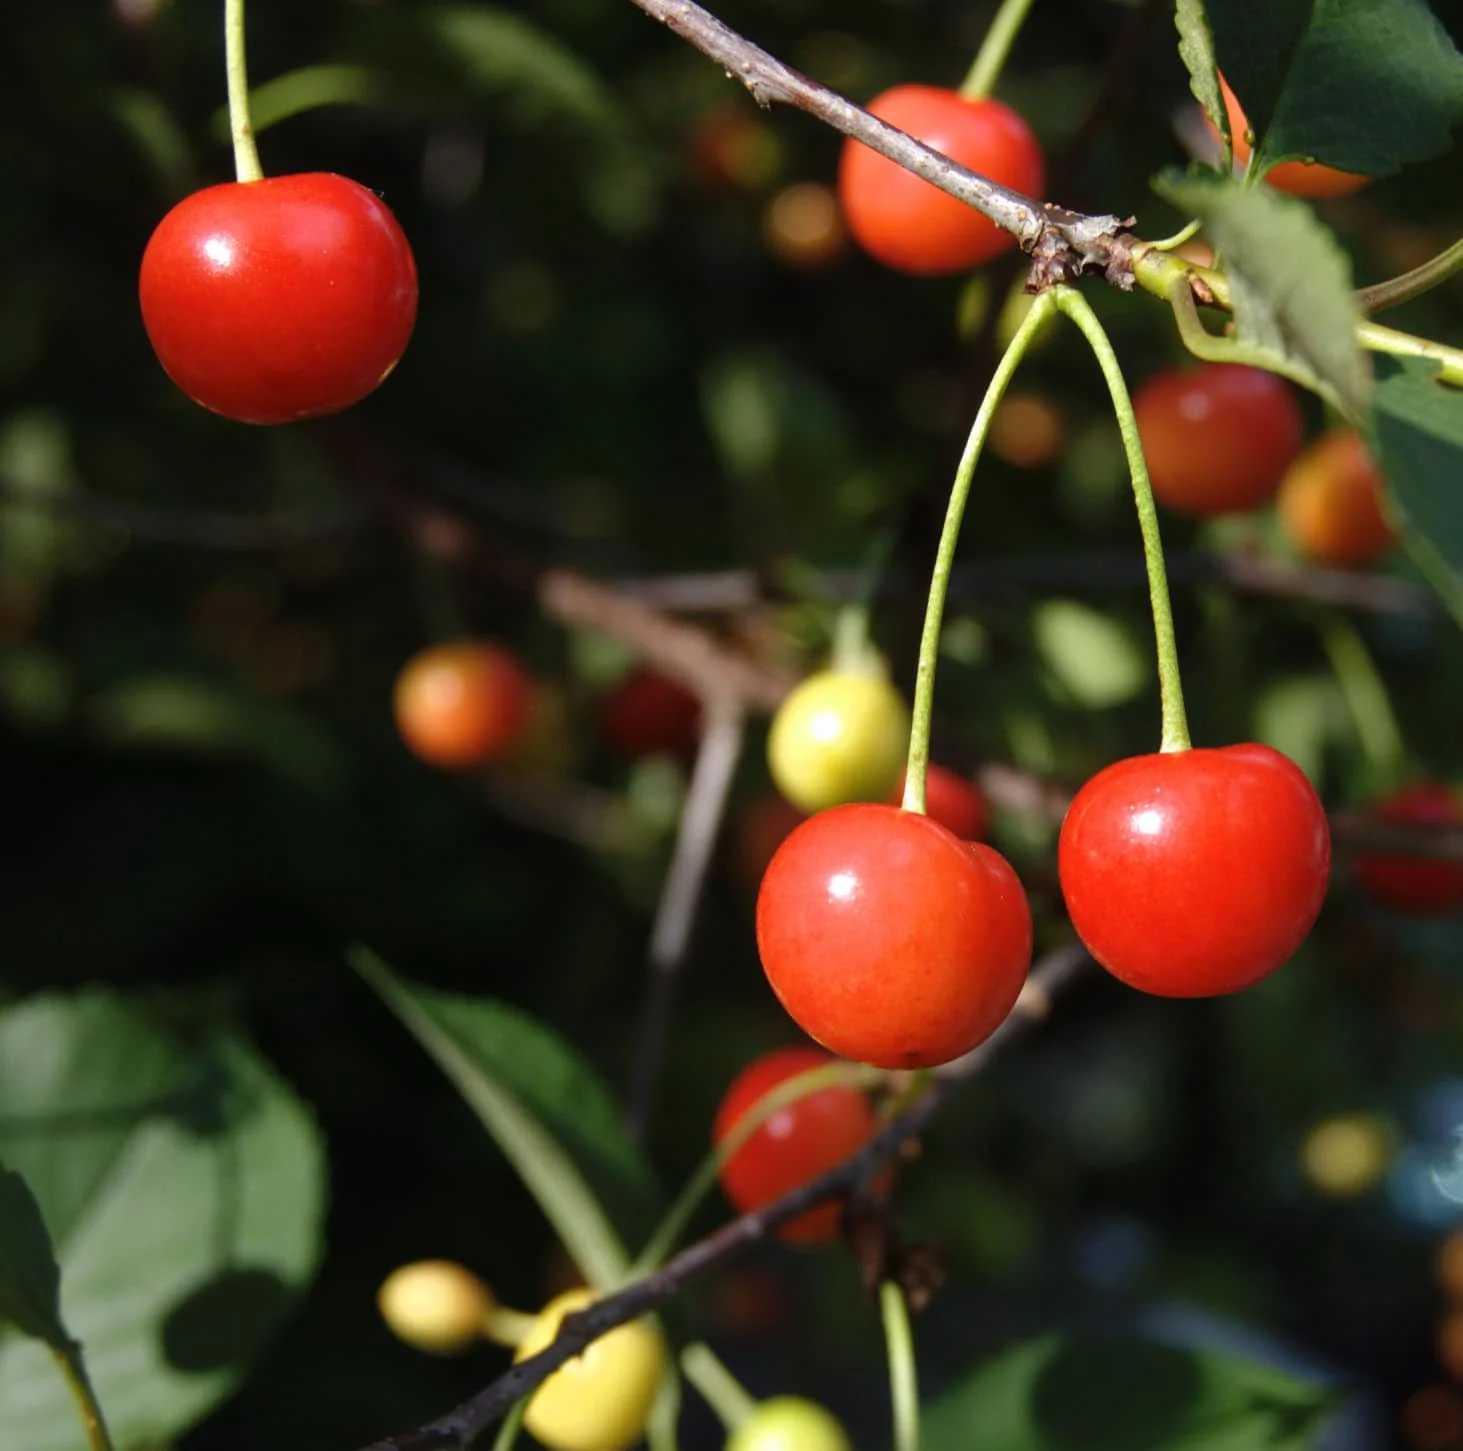 Sour Cherries on a tree